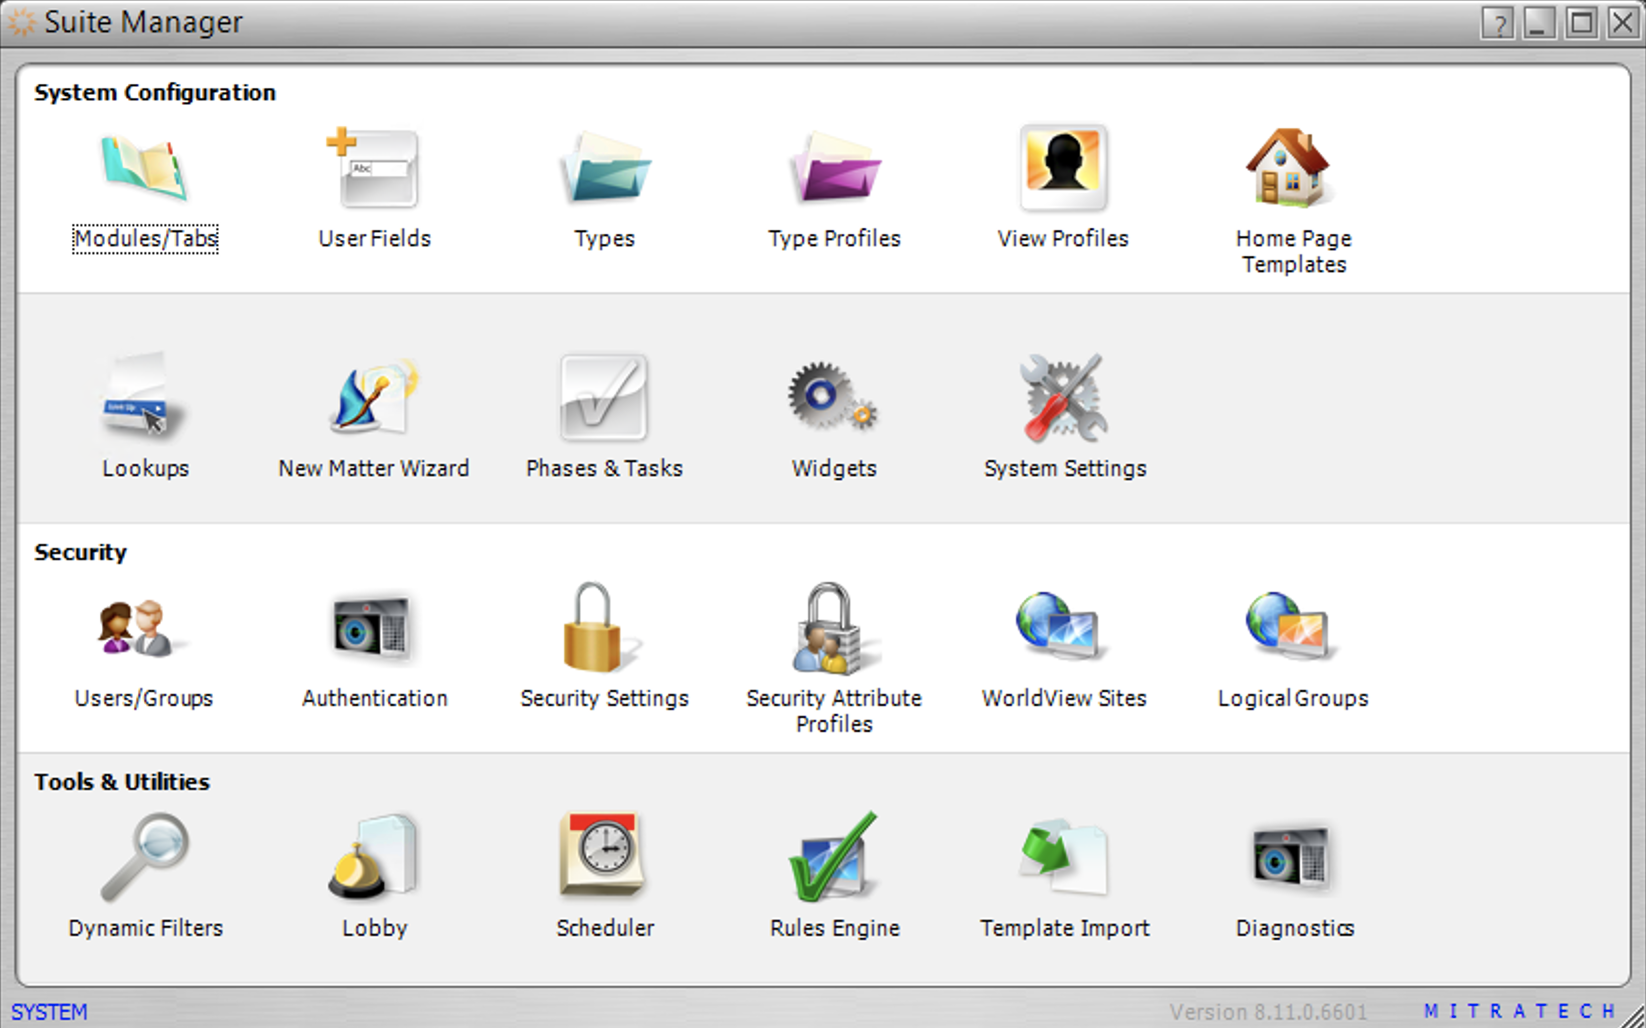 Suite Manager window with its icons